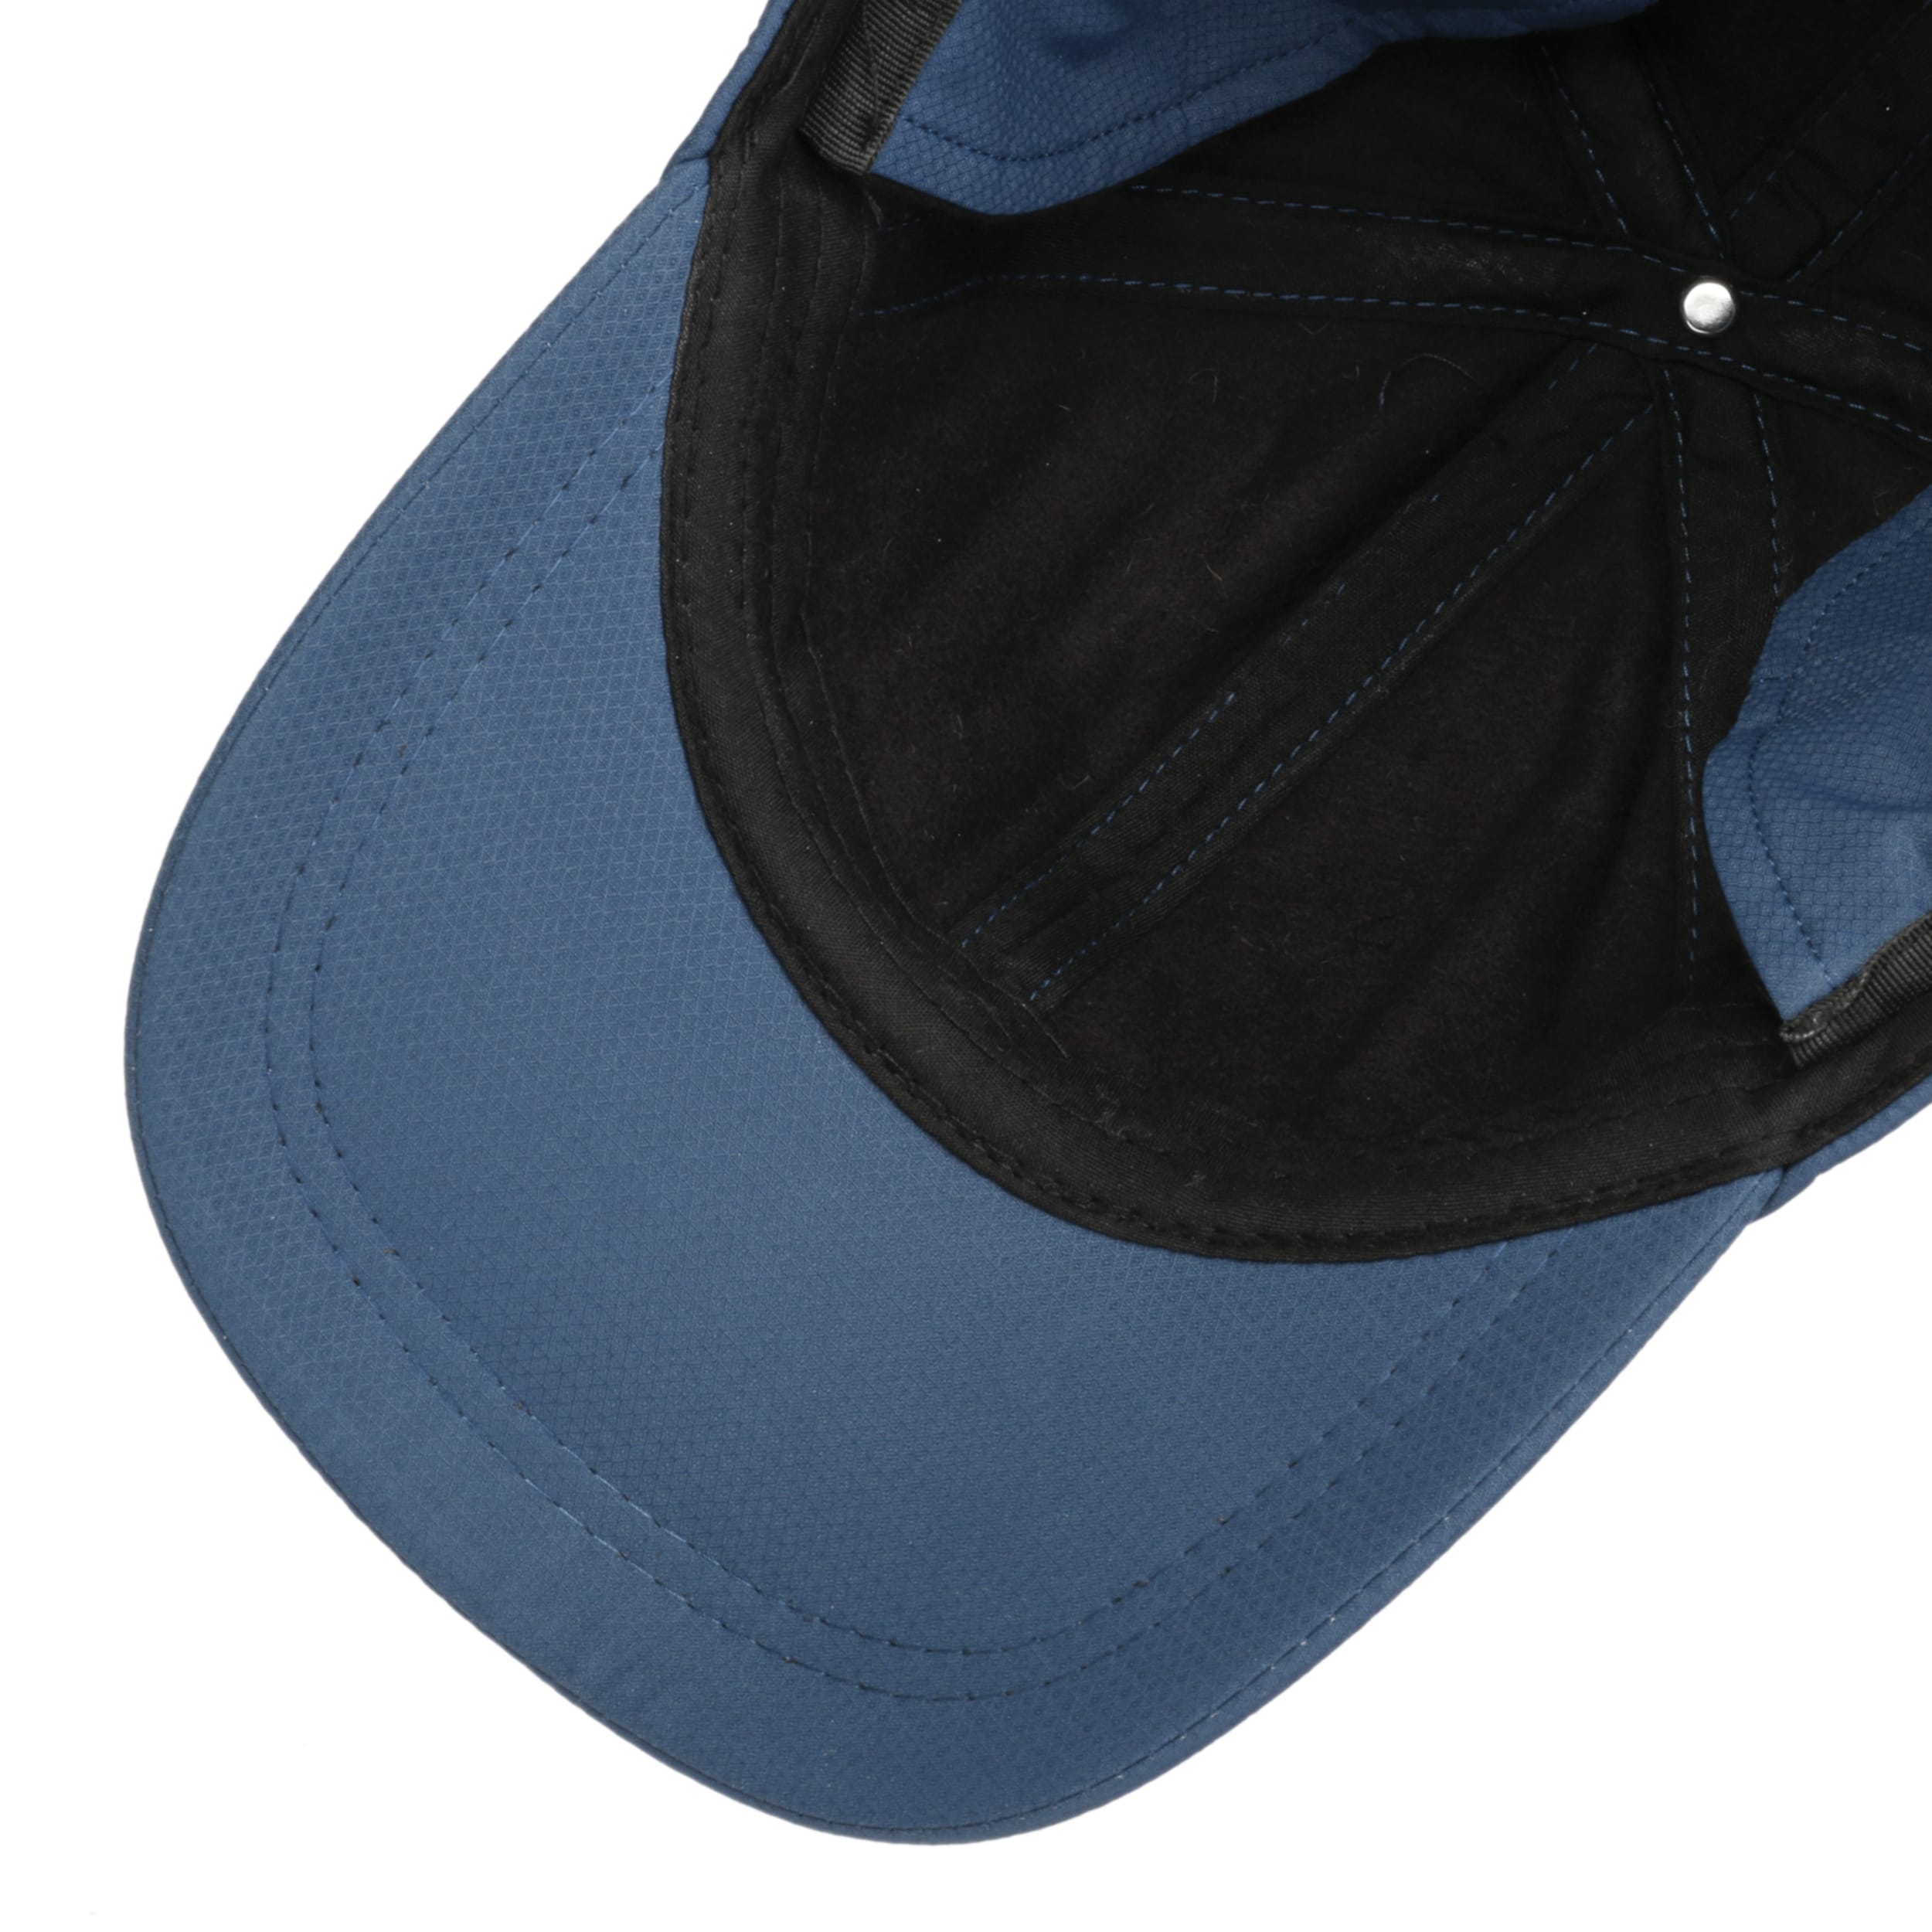 3M Thinsulate Cap 29,95 by - Lipodo mit Ohrenklappen €